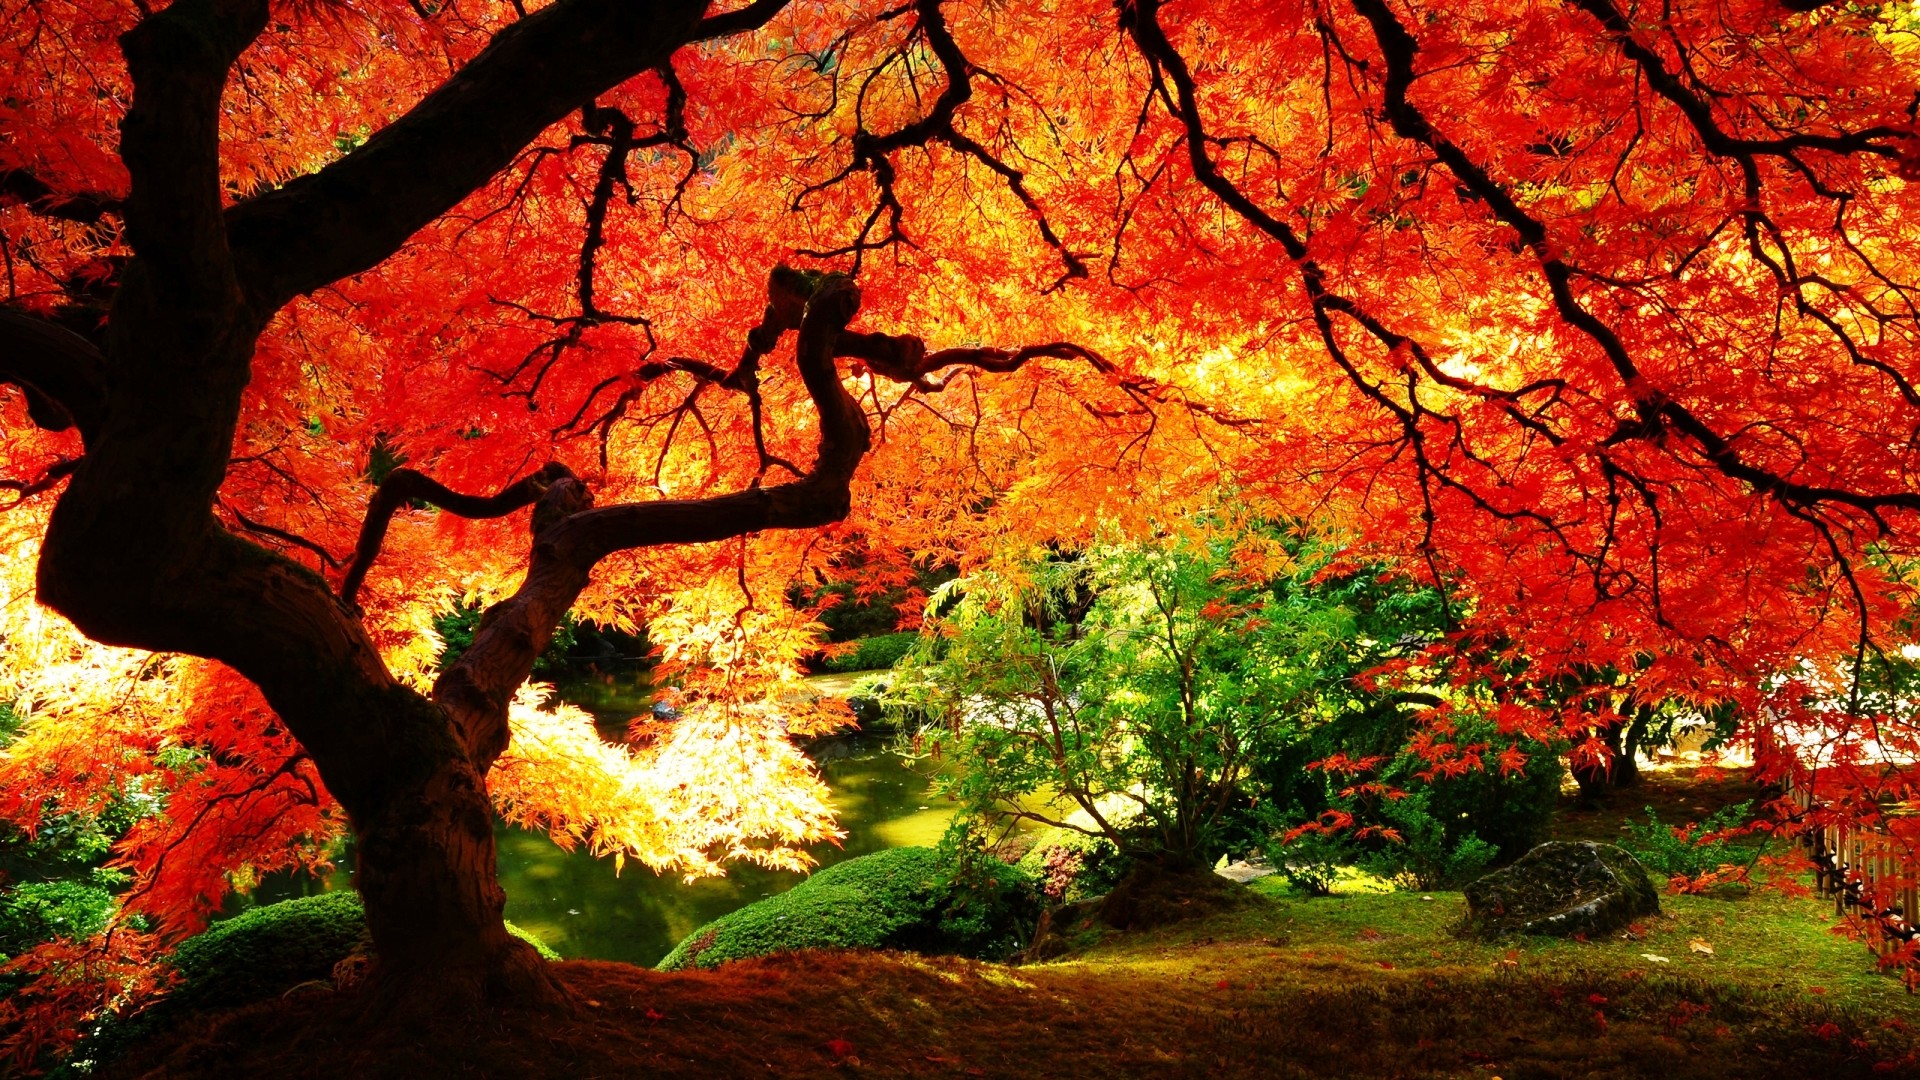 1920x1080 Download Link : Link Image Download. View Original Images : Autumn Fall  Wallpaper